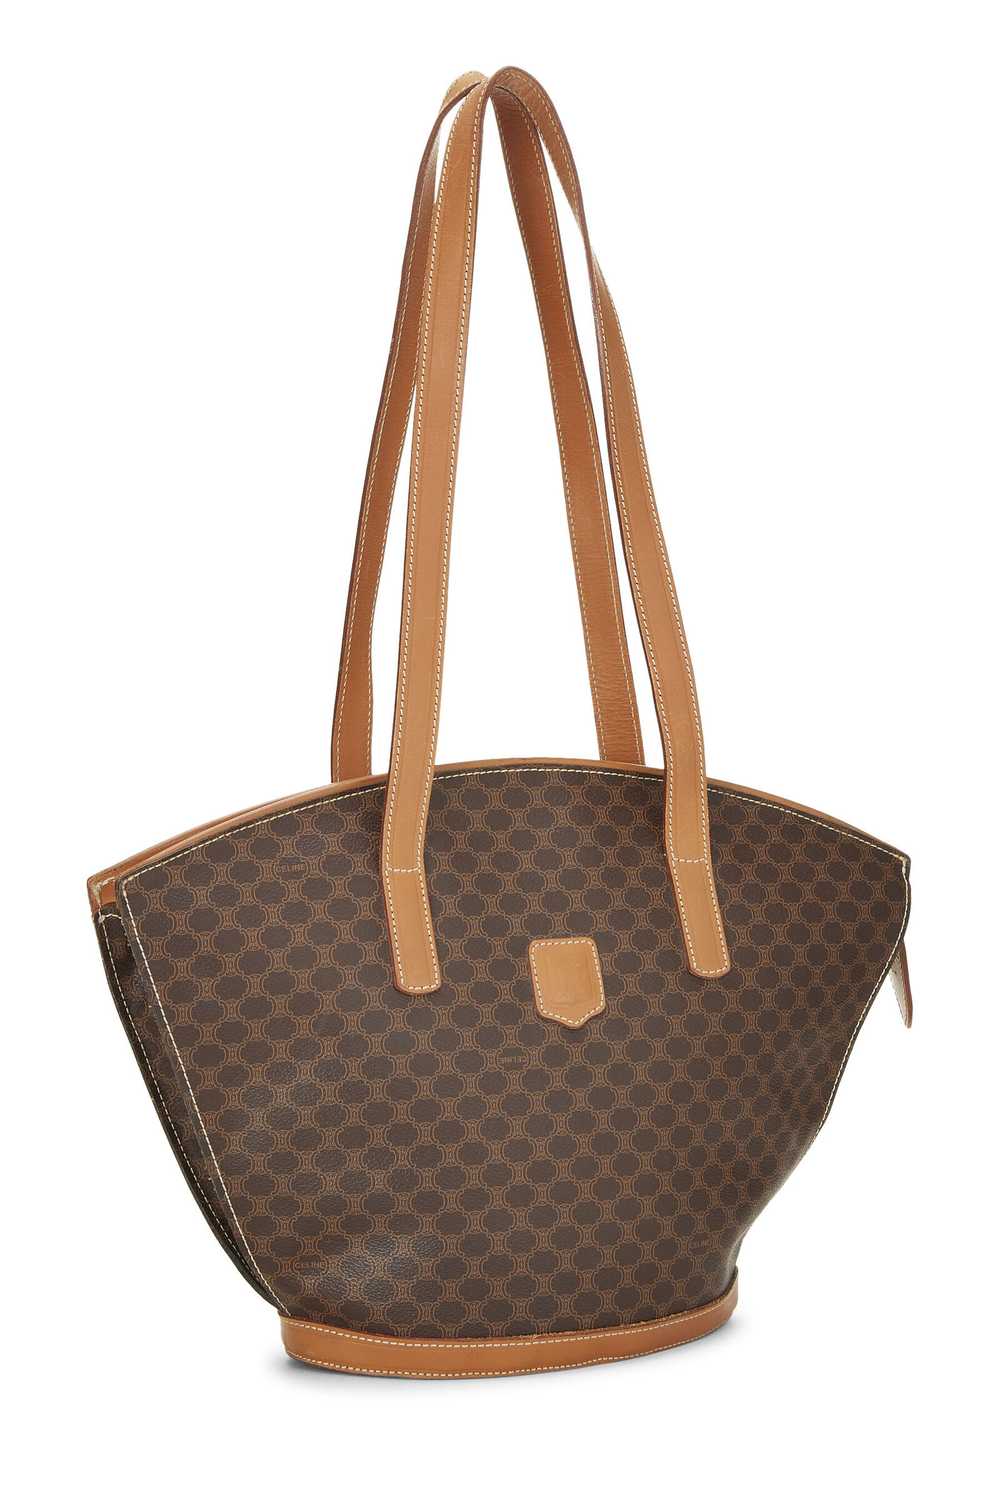 Brown Coated Canvas Macadam Tote - image 2